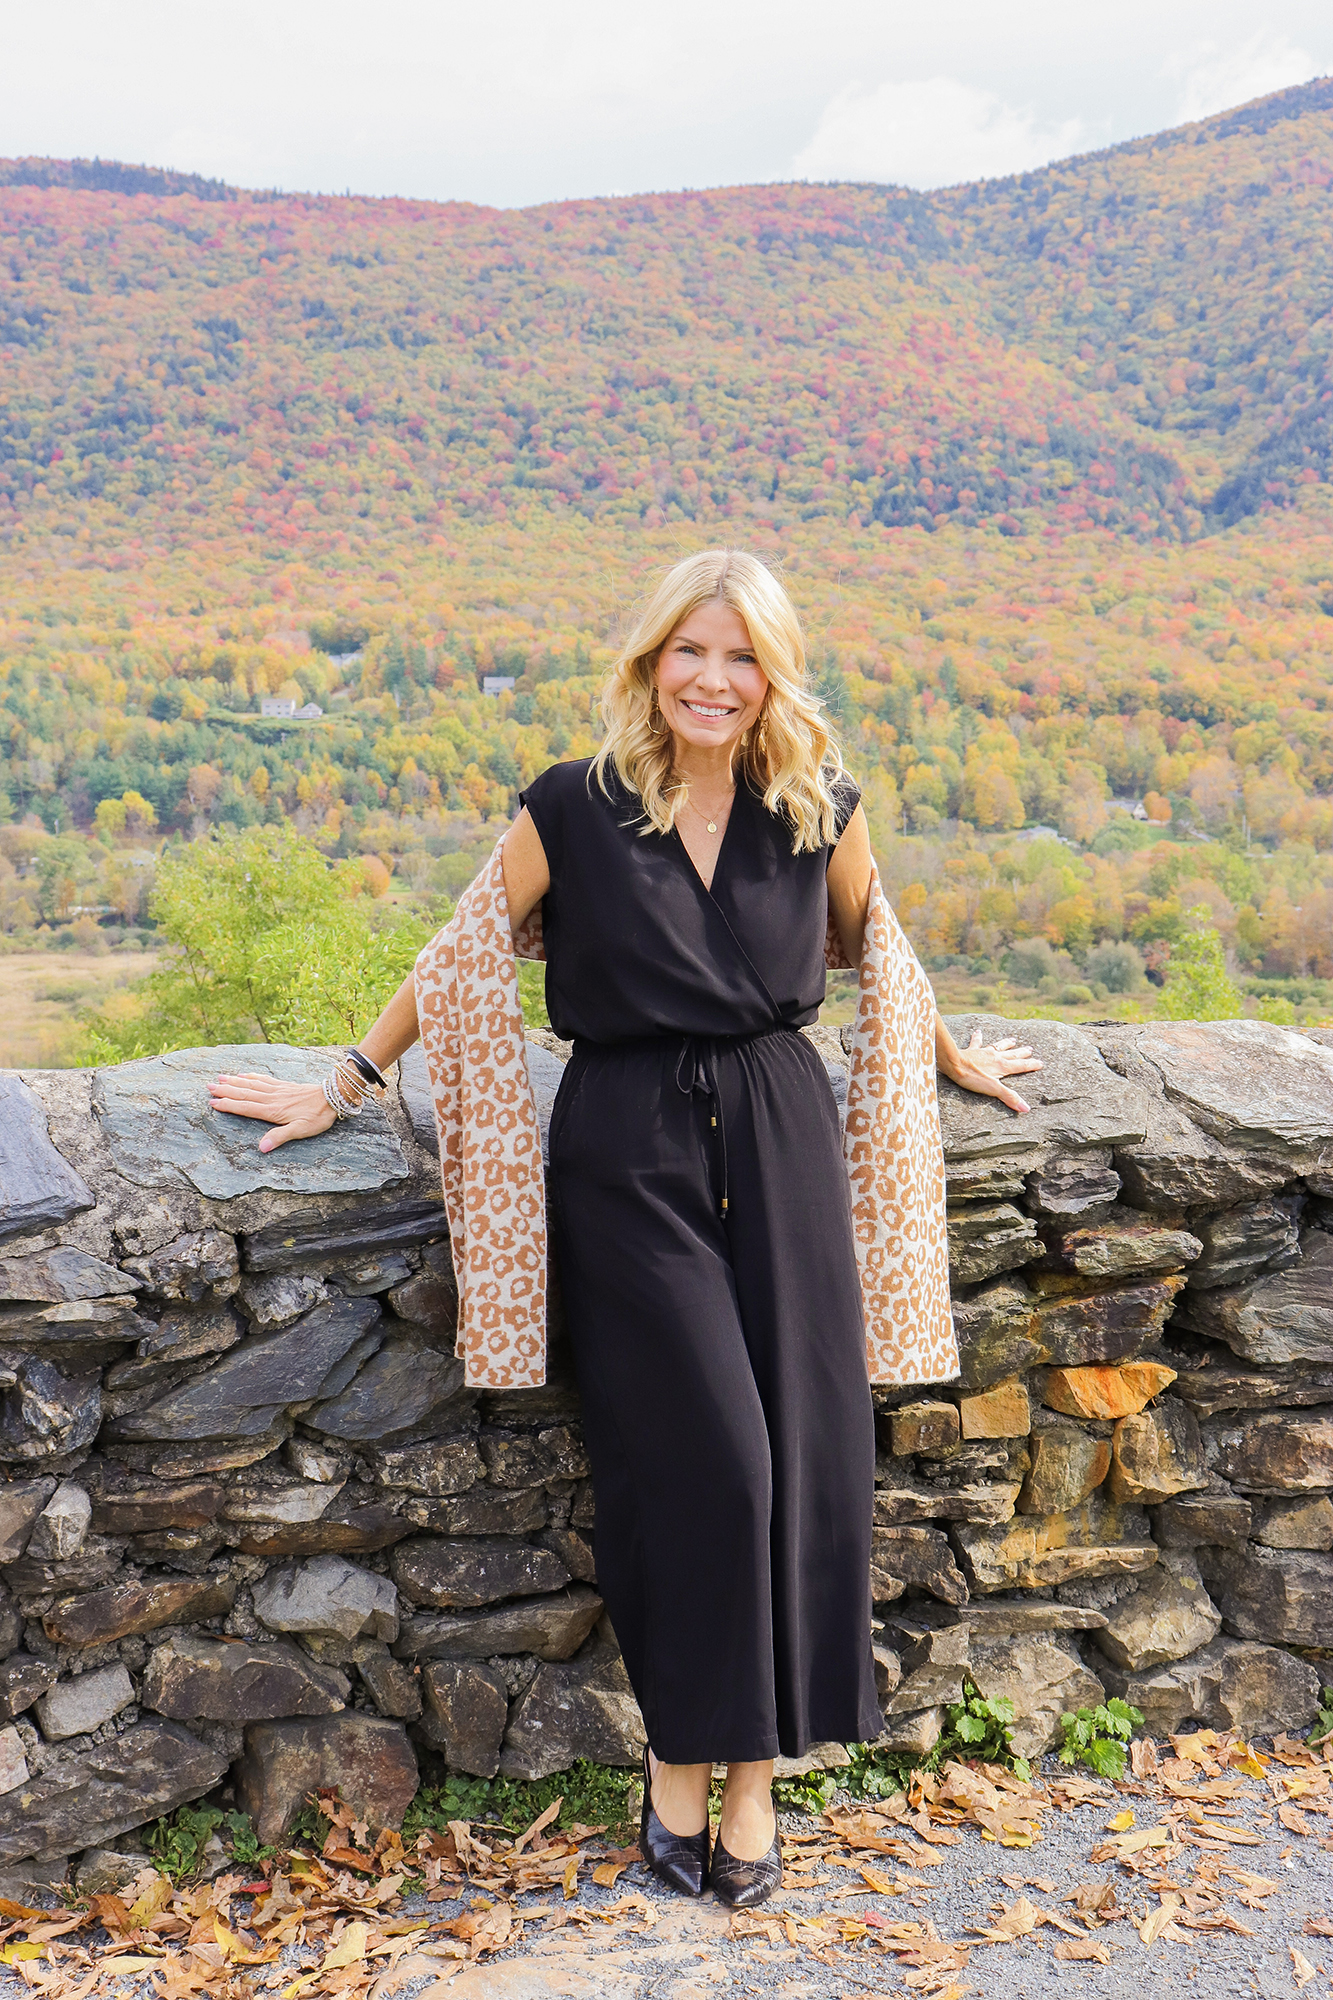 Fall Fashion in New England - Brought all of my adorable and affordable autumn fashions with me on my leaf peeping trip to Vermont. 